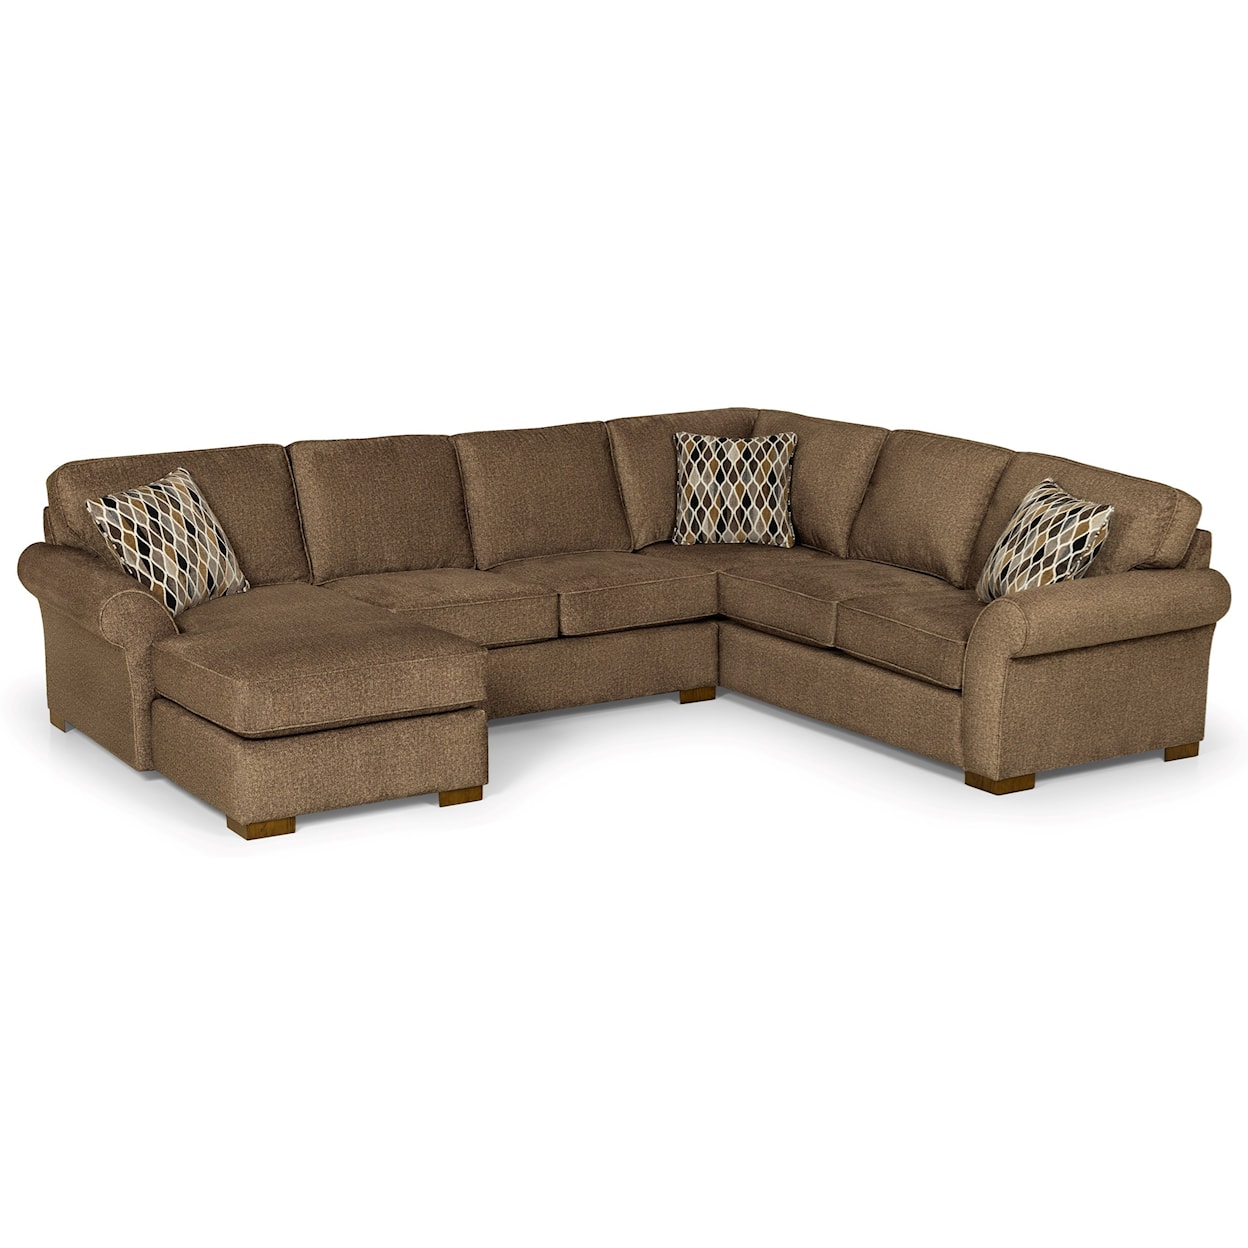 Sunset Home 29662 5-Seat Sectional Sofa w/ LAF Chaise & Storag